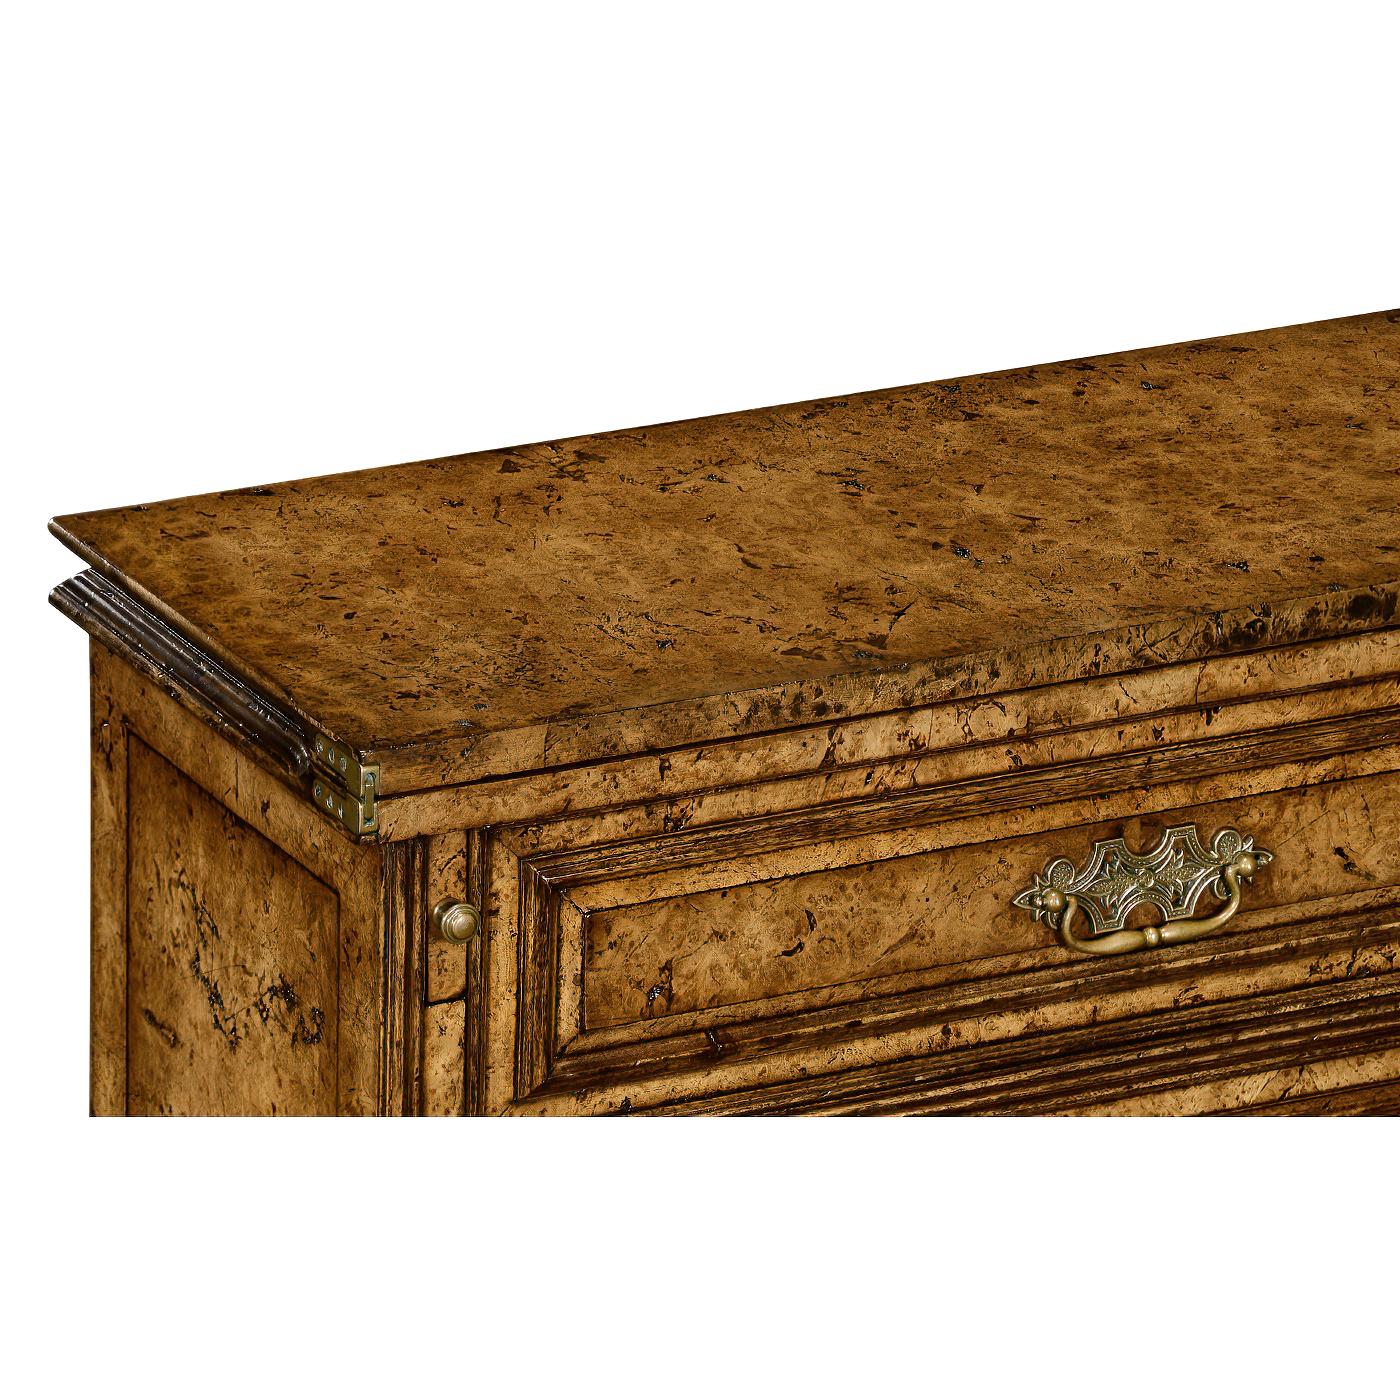 Contemporary Queen Anne Bachelor's Chest